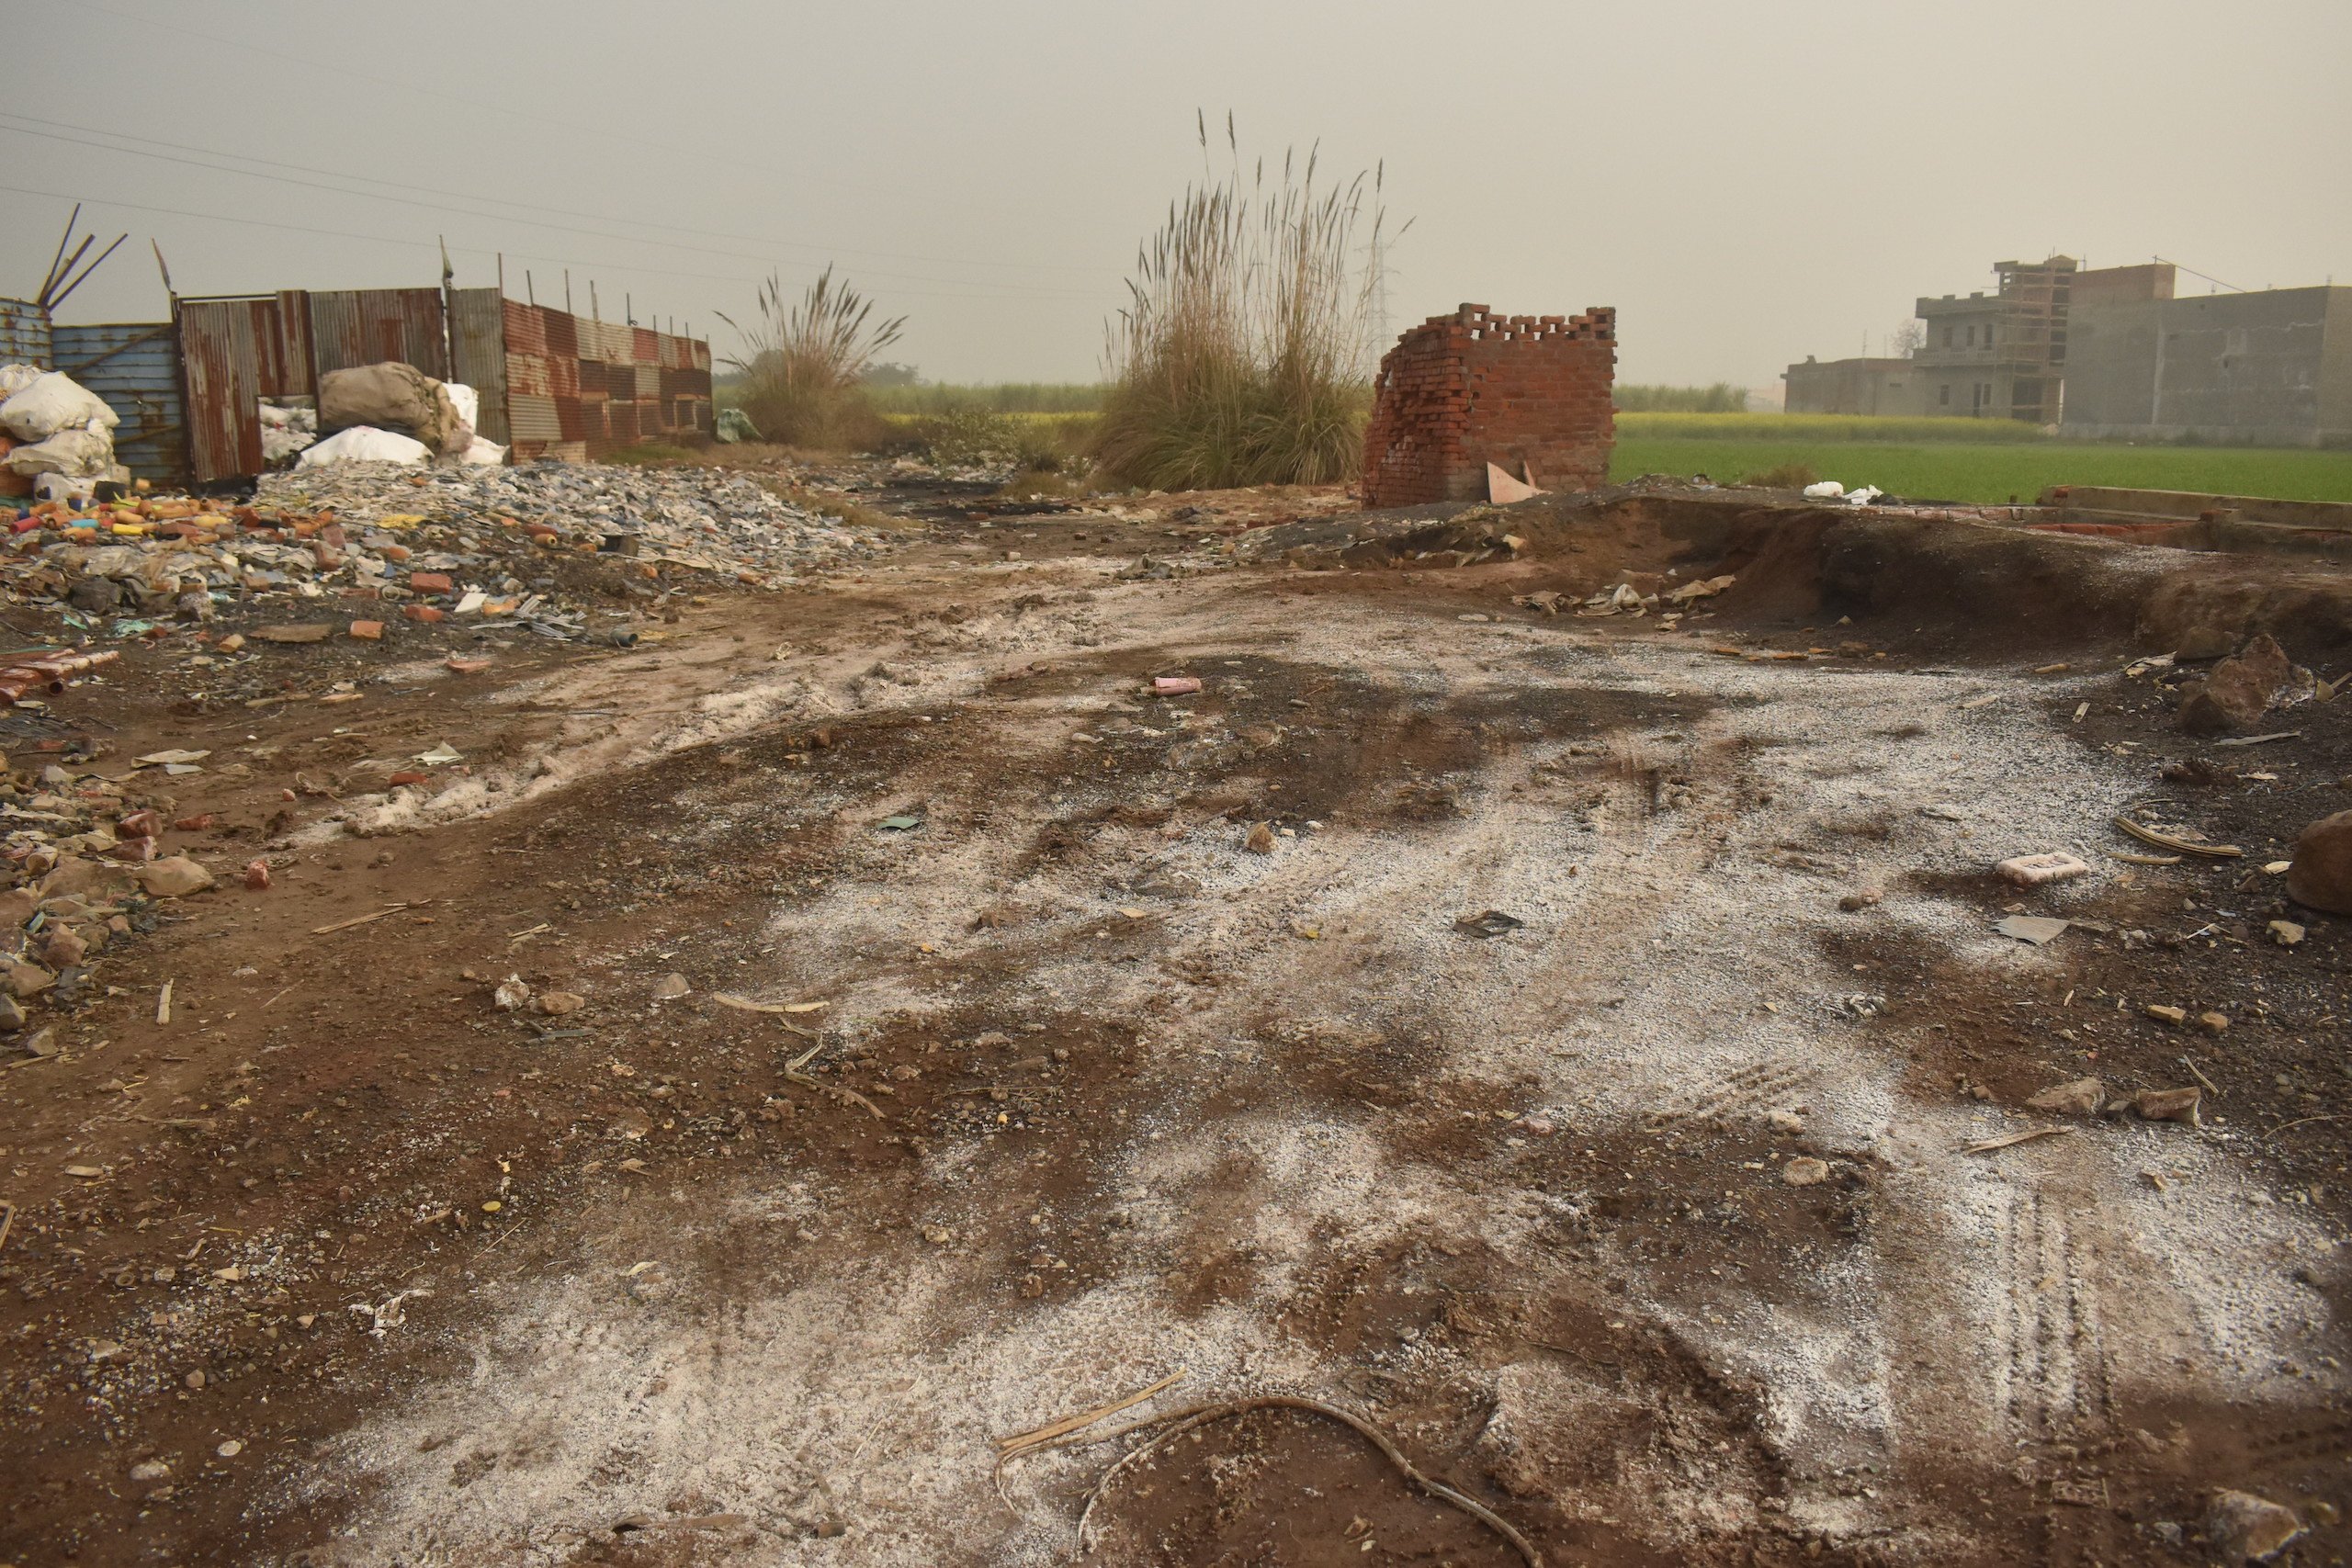 Poisoned soil left by illegal lead-smelting operations, Monish Upadhyay